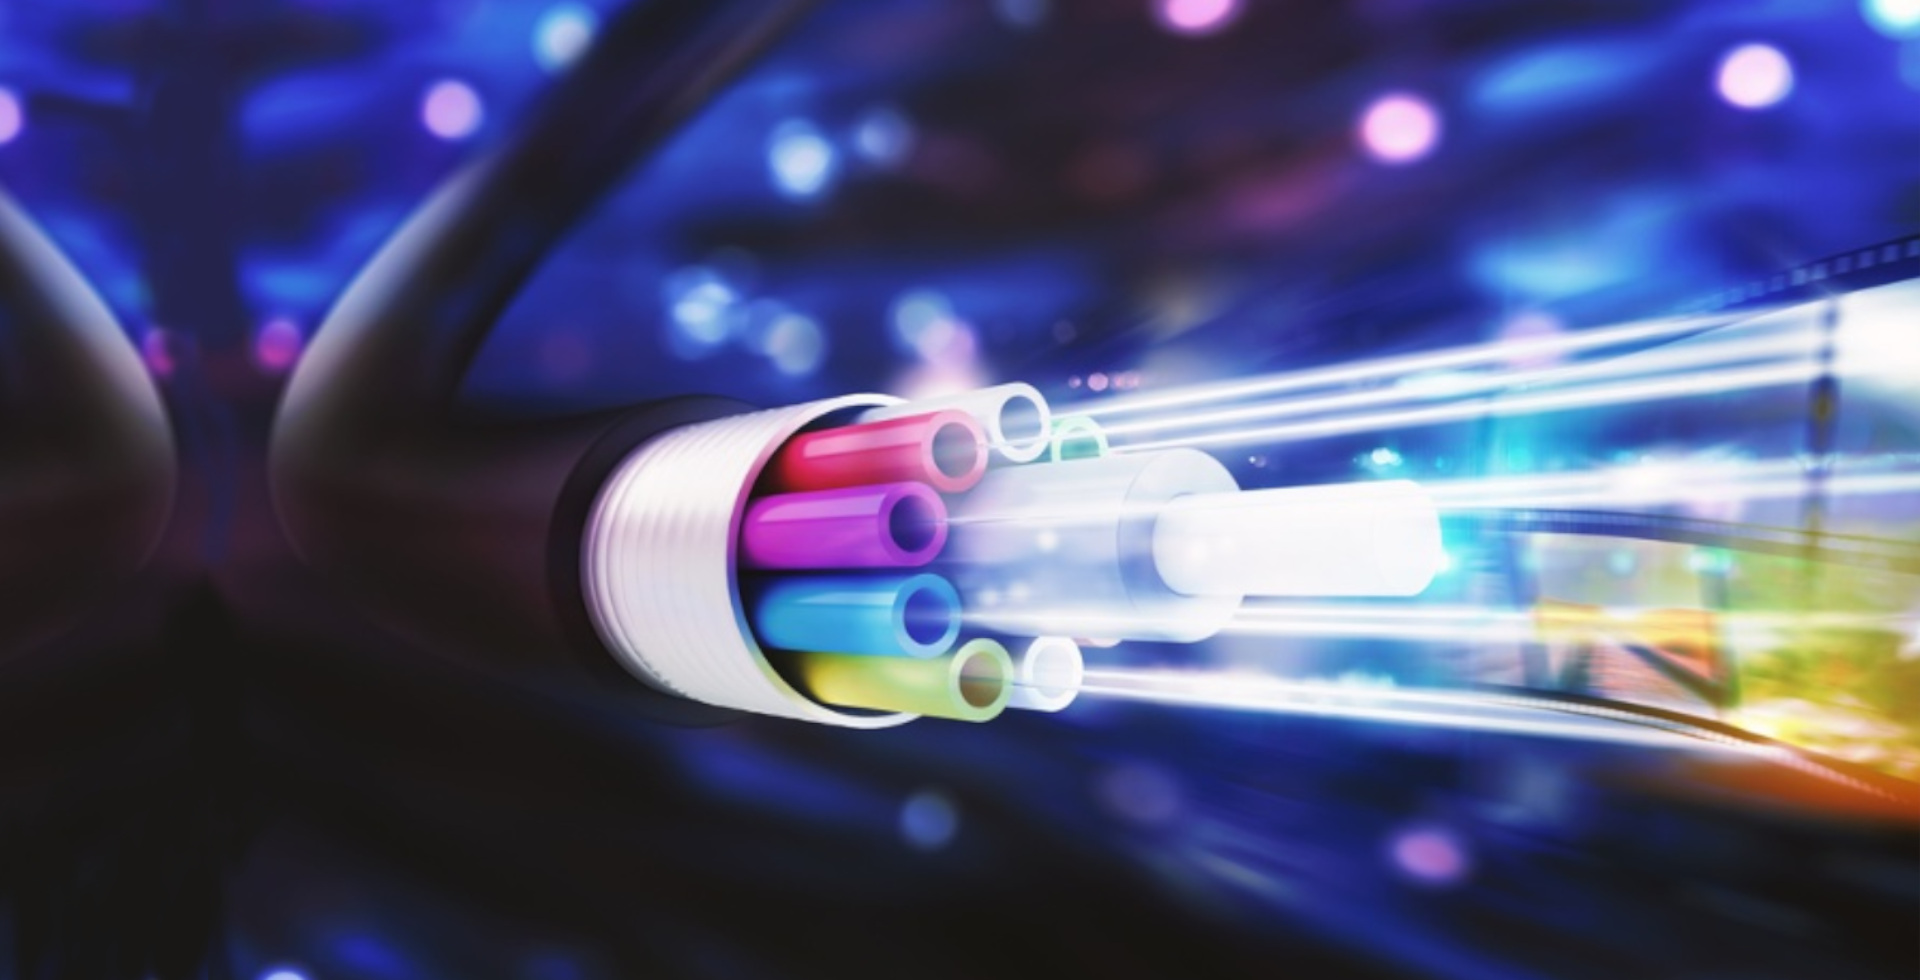 Allianz and Telefónica create a partnership to deploy fibre in Germany through an open wholesale company